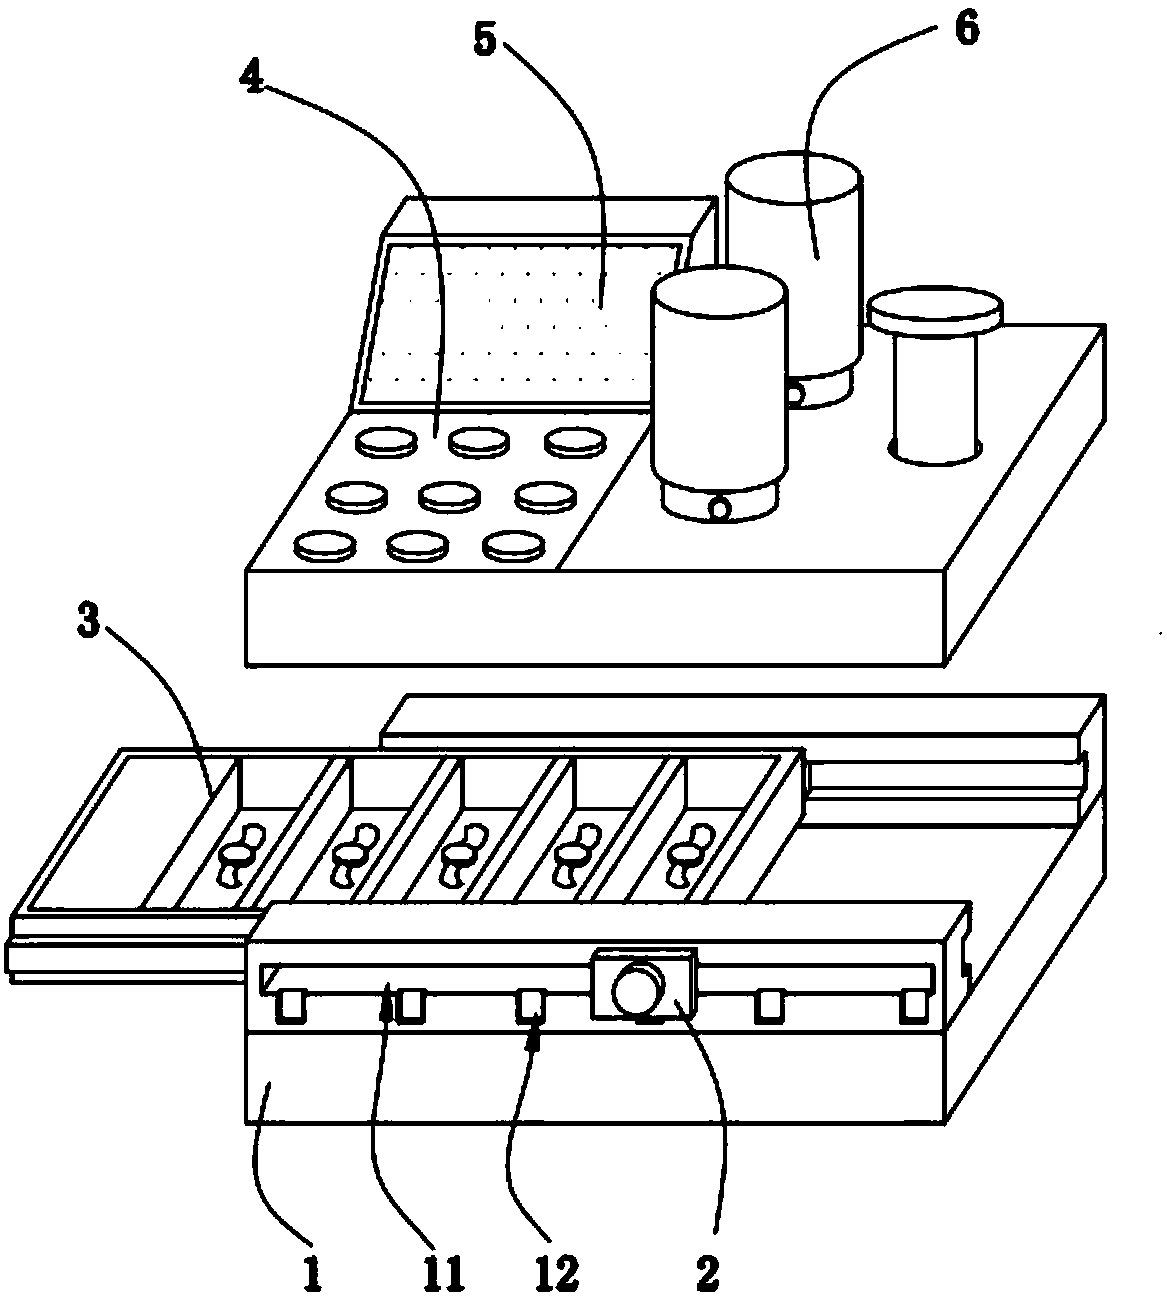 Method for safely detecting food preservative content